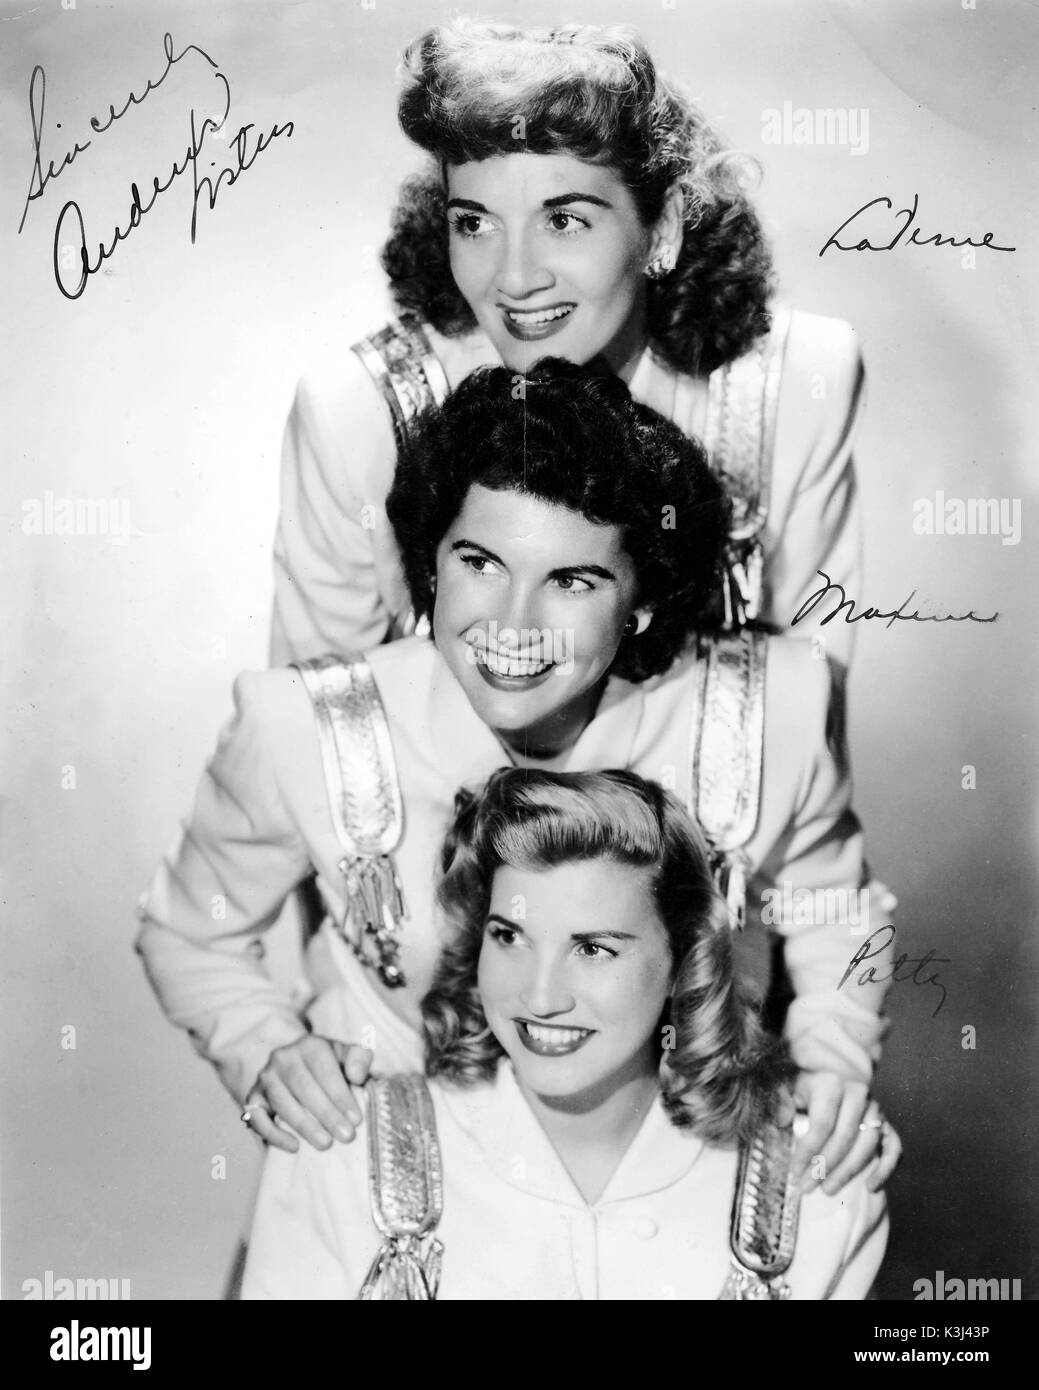 ANDREWS SISTERS Actresses, Singers, Performing Group LAVERNE ANDREWS MAXINE ANDREWS [1916 - 1995] [Bottom] PATTY ANDREWS (1918 - 2013) Stock Photo